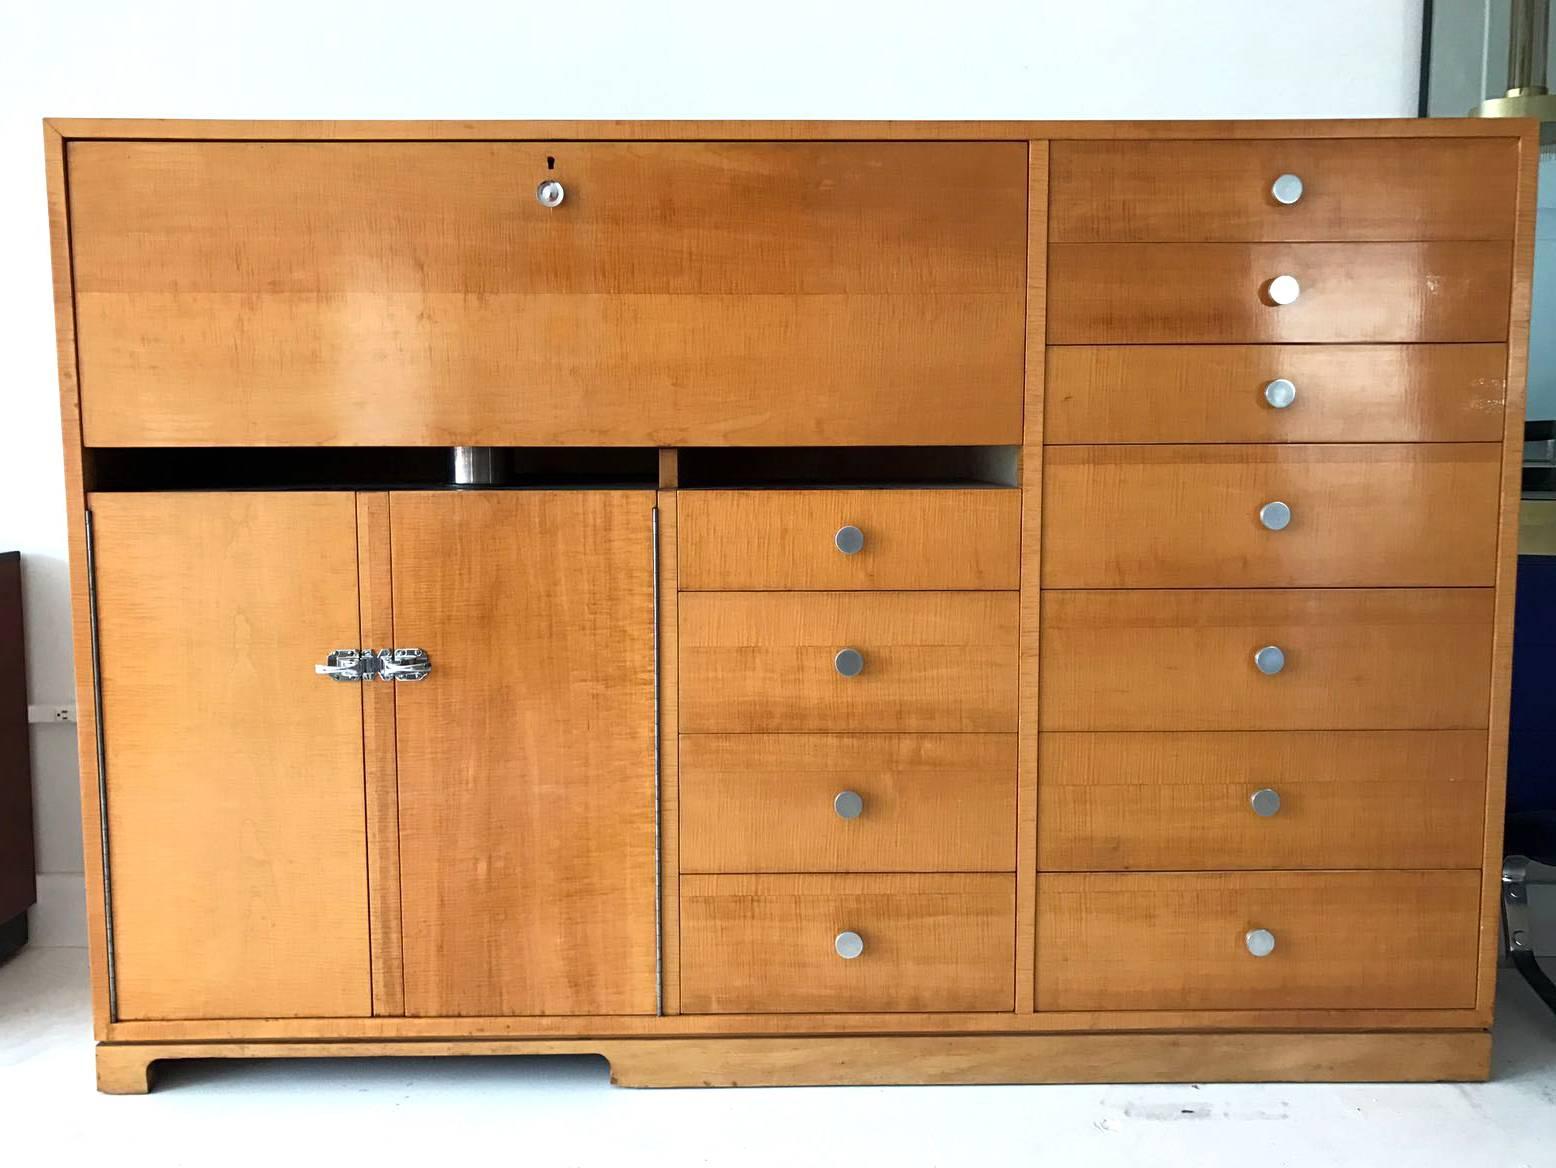 A one of a kind unique custom piece from celebrated American architect Philip Johnson (1906-2005). This tiger maple bar cabinet was designed by Philip Johnson for the NYC residence of Williams A.M. Burden Jr. (1906-1984), an long-term ex-president